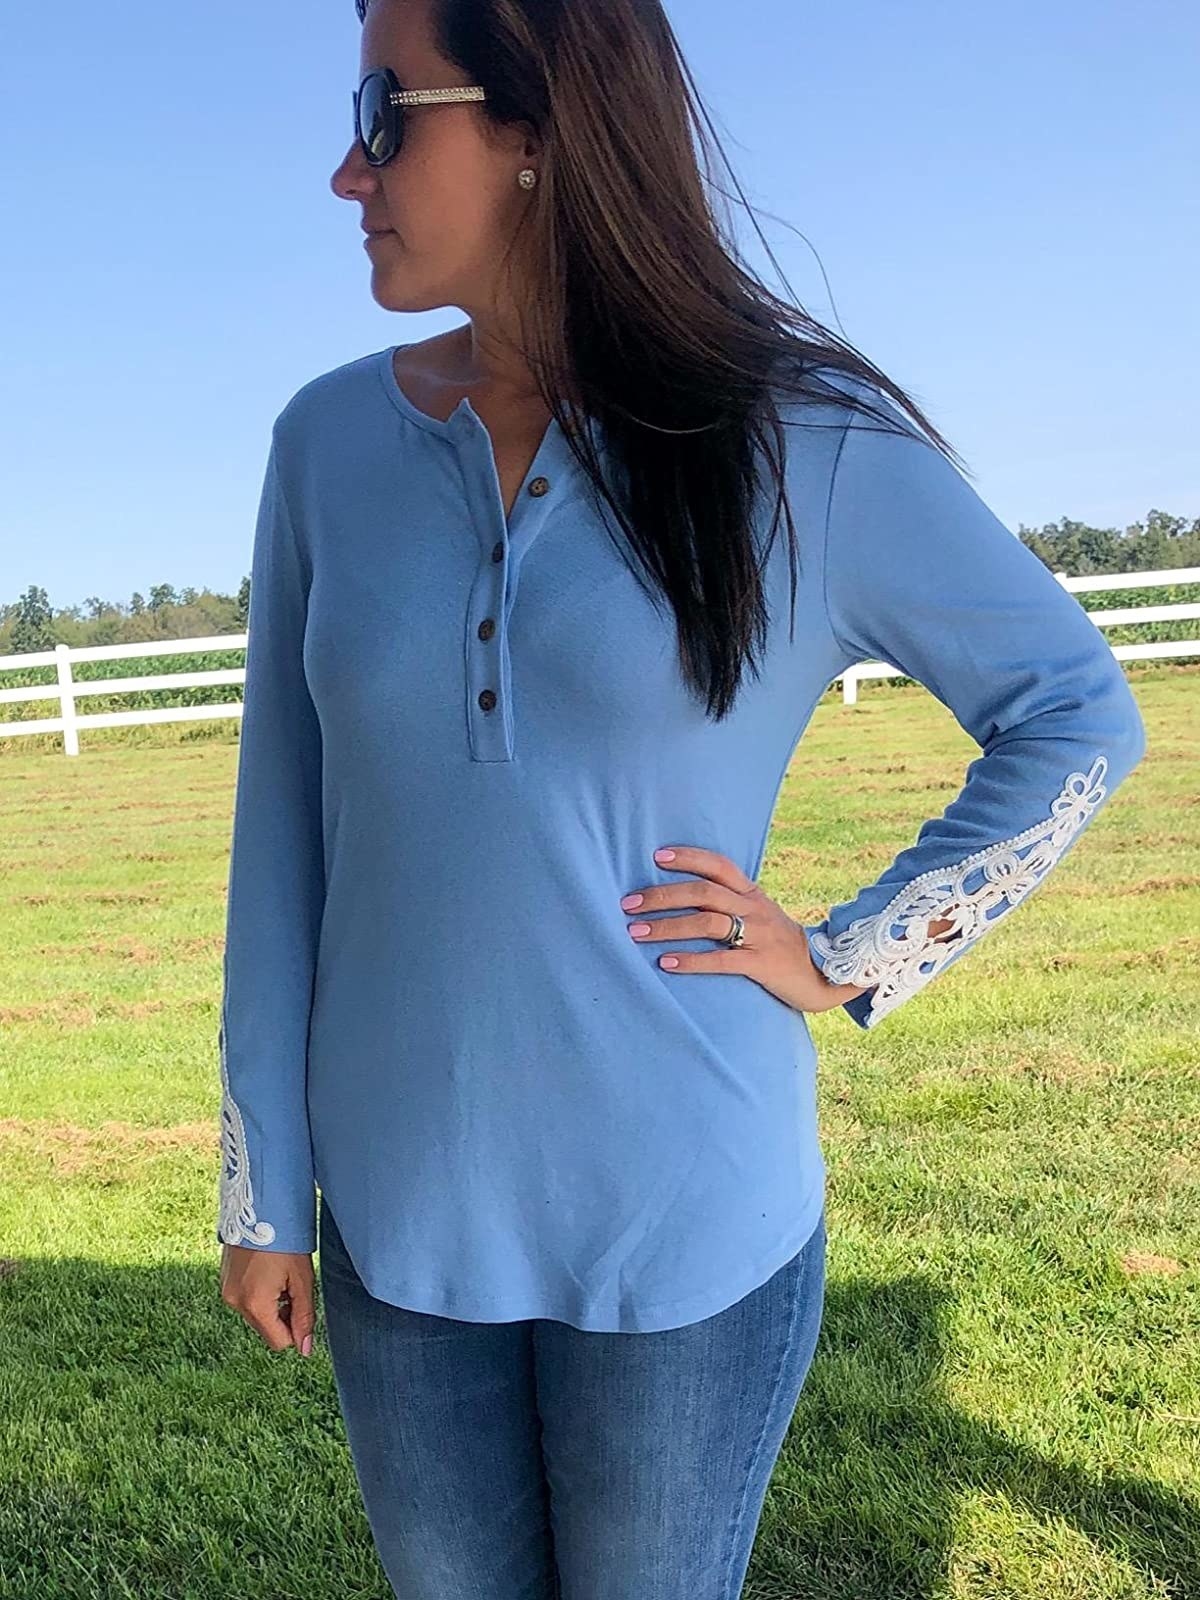 A reviewer wearing the shirt in blue with white lace details at the sleeves